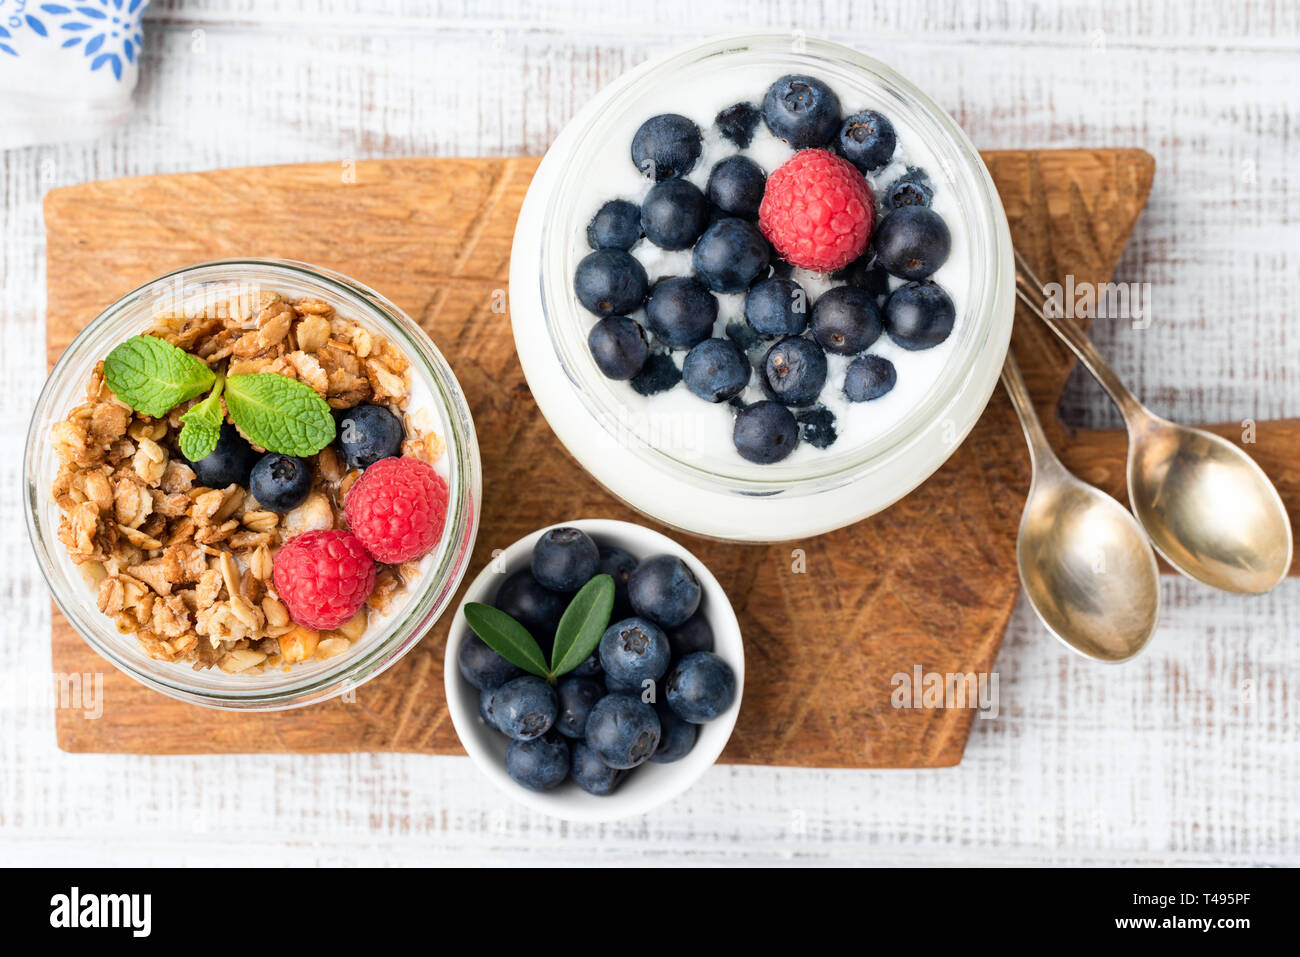 Yogurt, granola and blueberries in jar on wooden board, table top view. Healthy eating, healthy lifestyle, dieting or weight loss concept Stock Photo